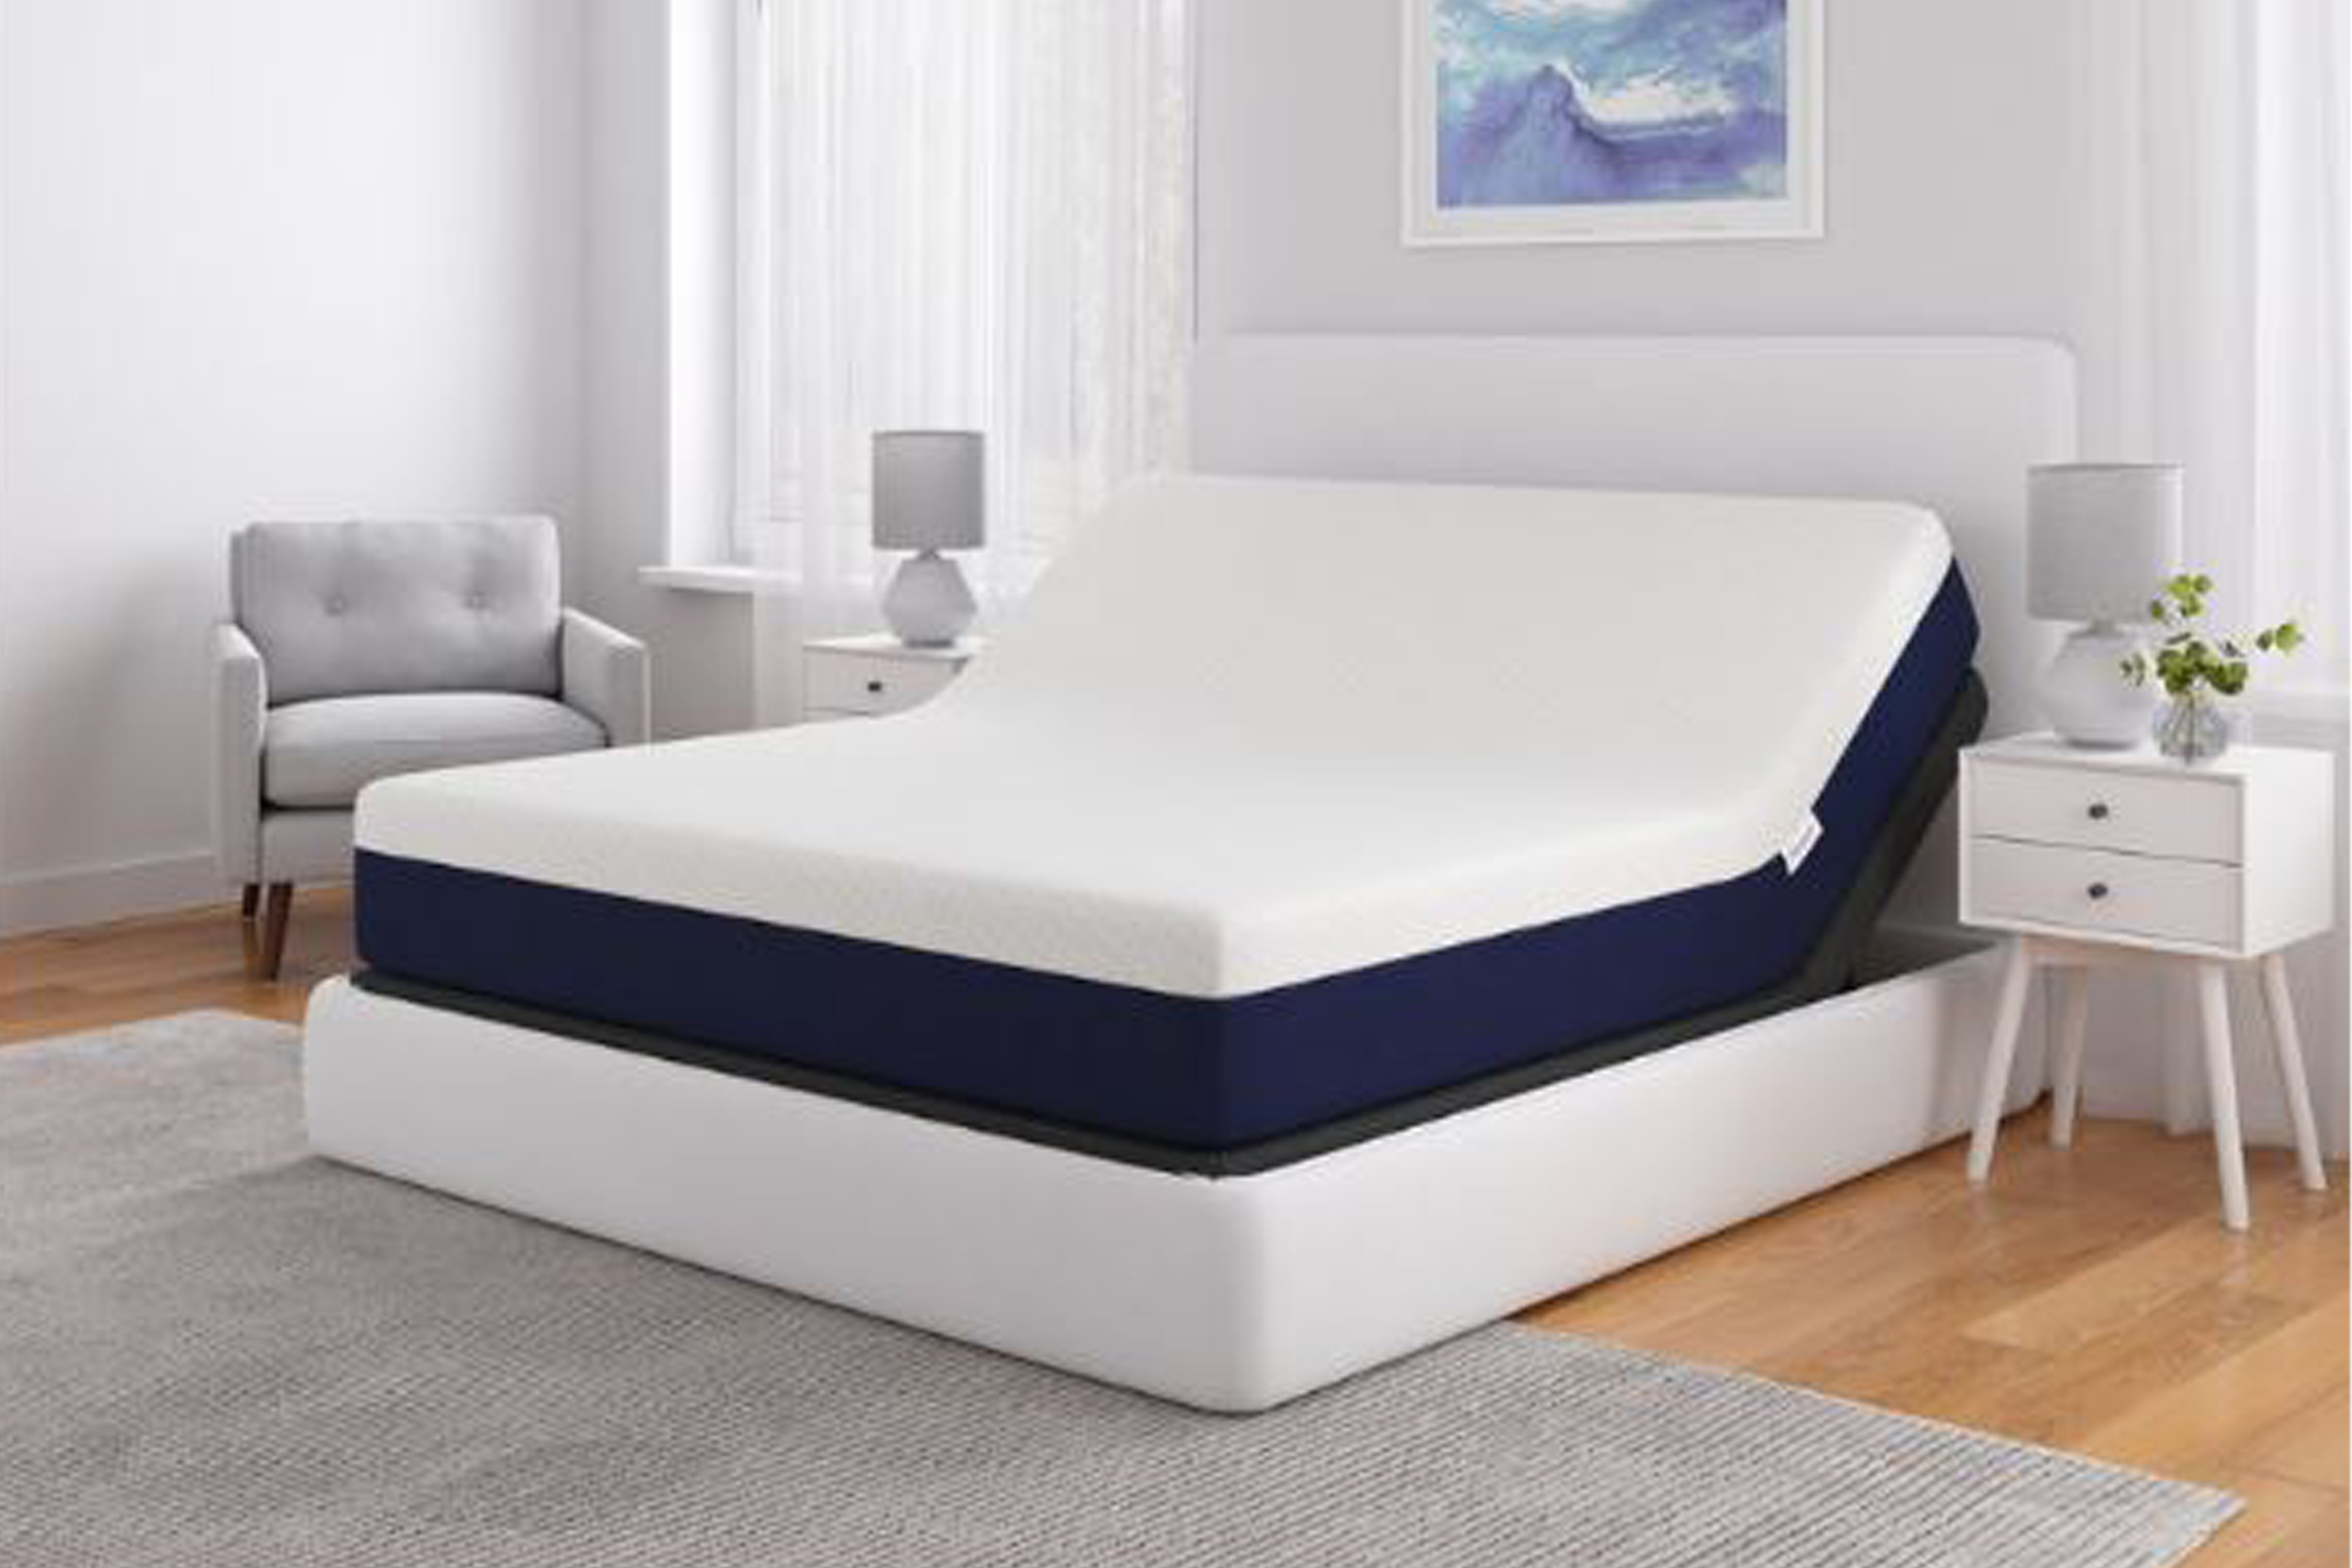 An Adjustable hybrid mattress for vacation rental homes for a memorable good night's sleep. 